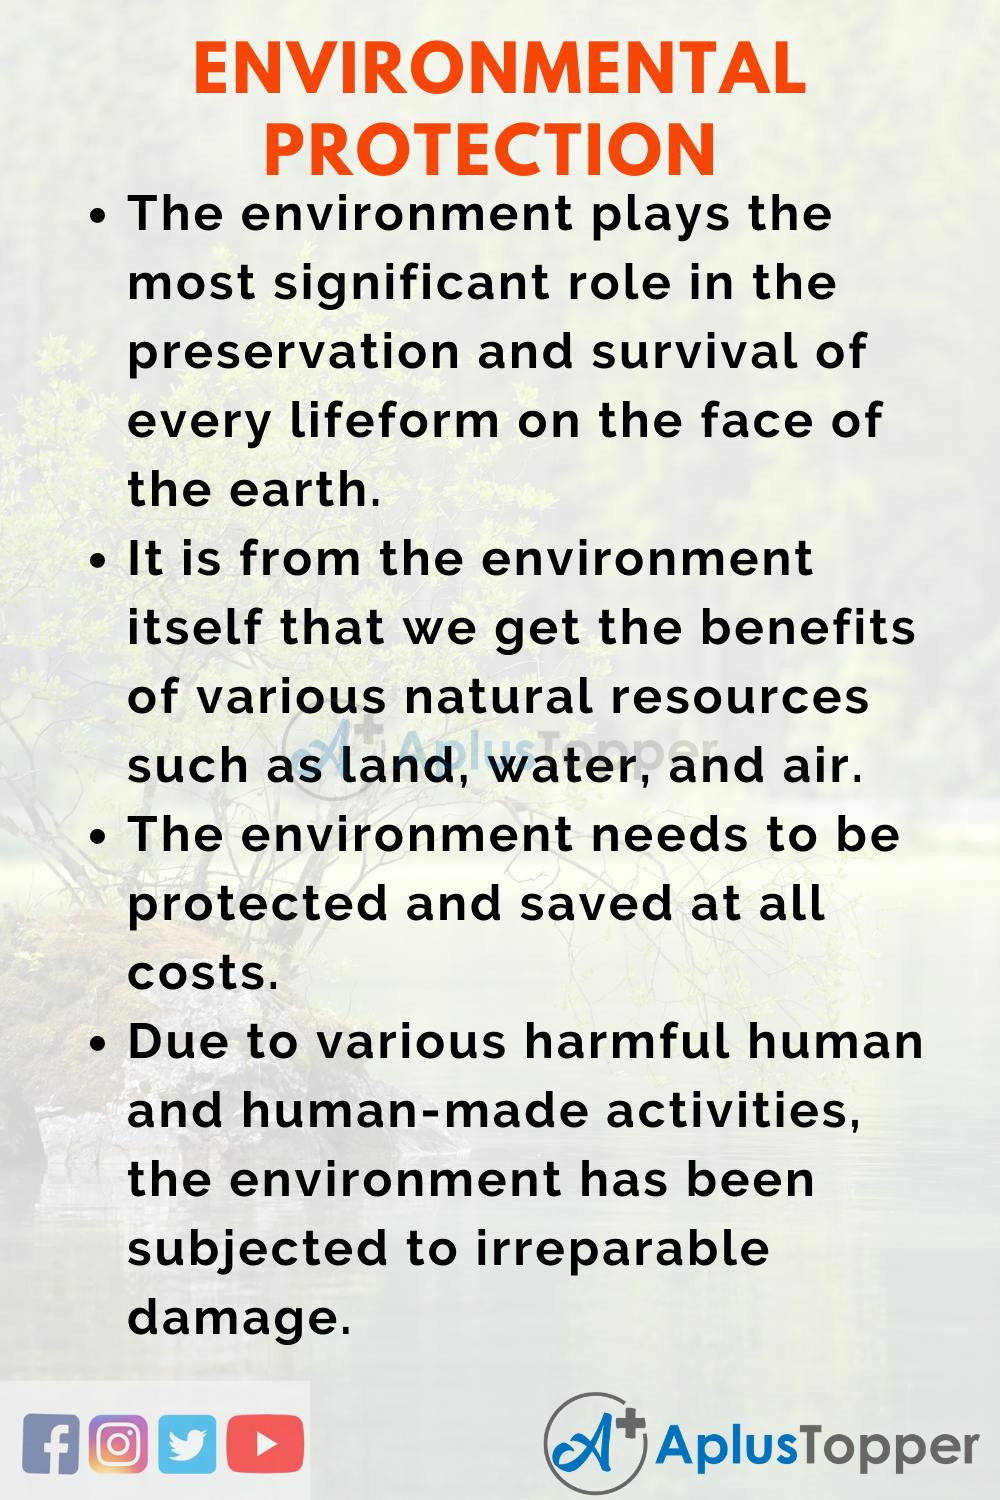 conservation of environment essay